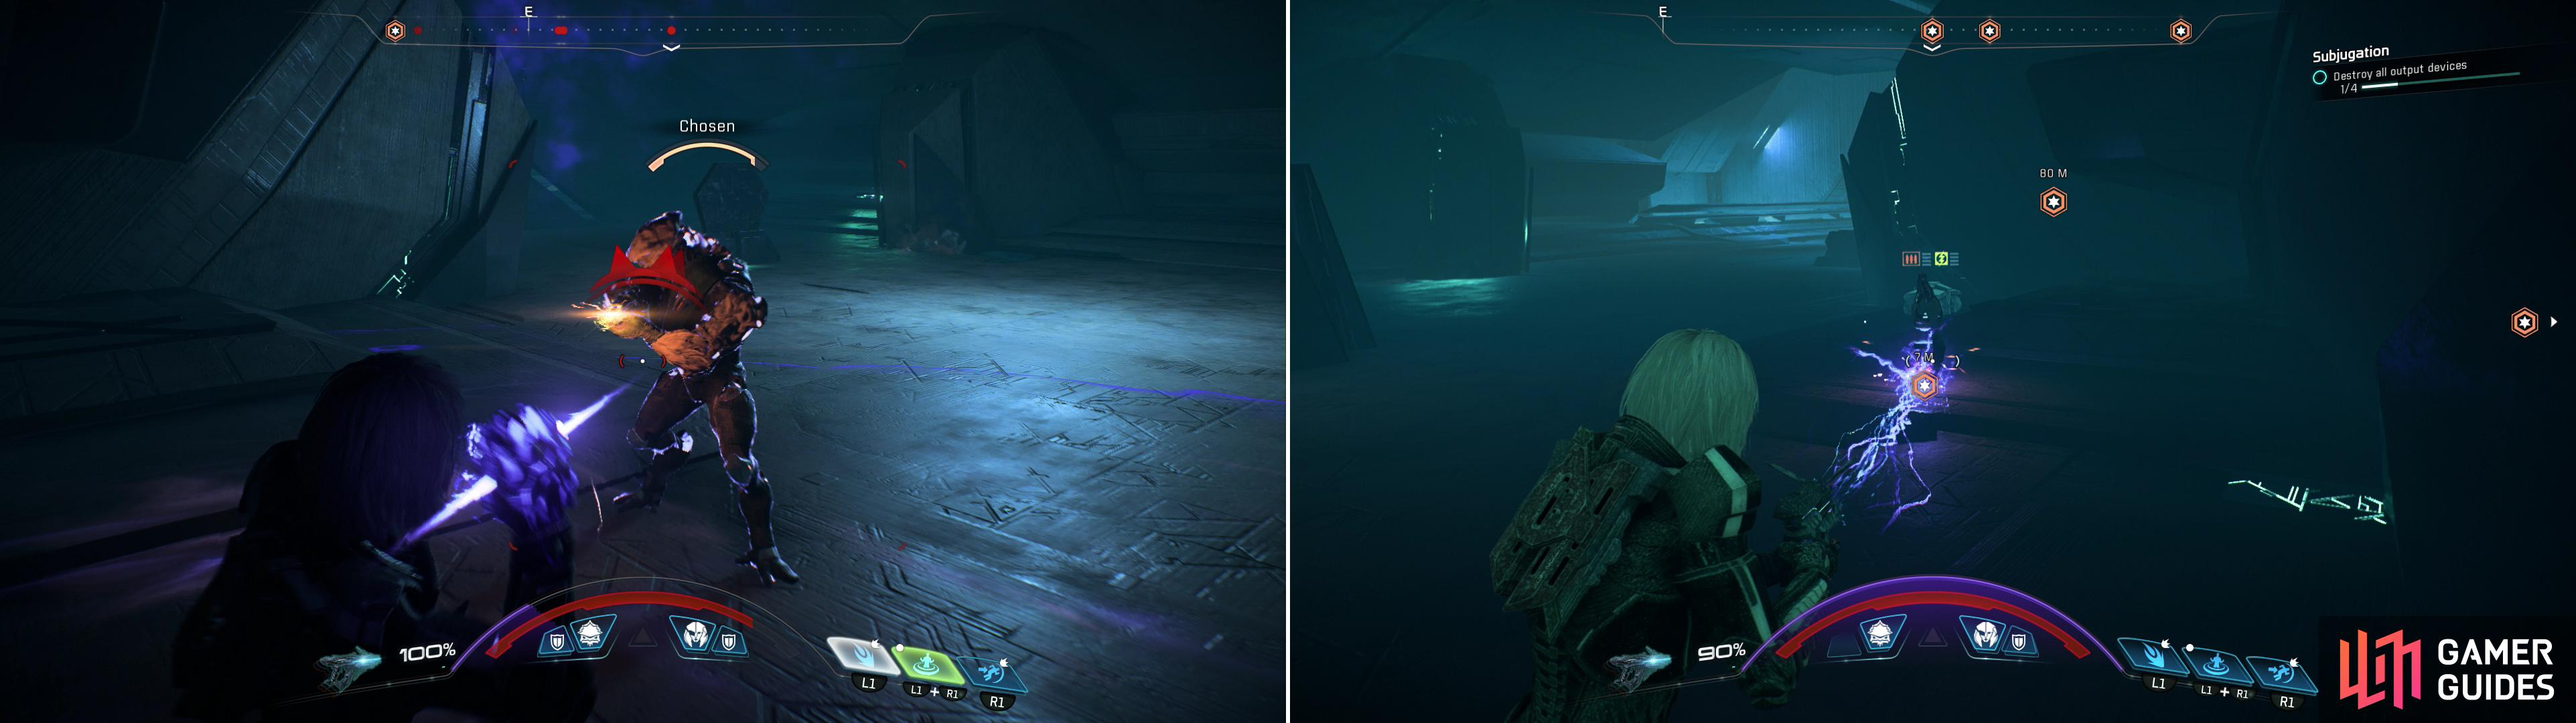 Kill any Kett you find in the Remnant ruins (left) and destroy their Output Devices (right).